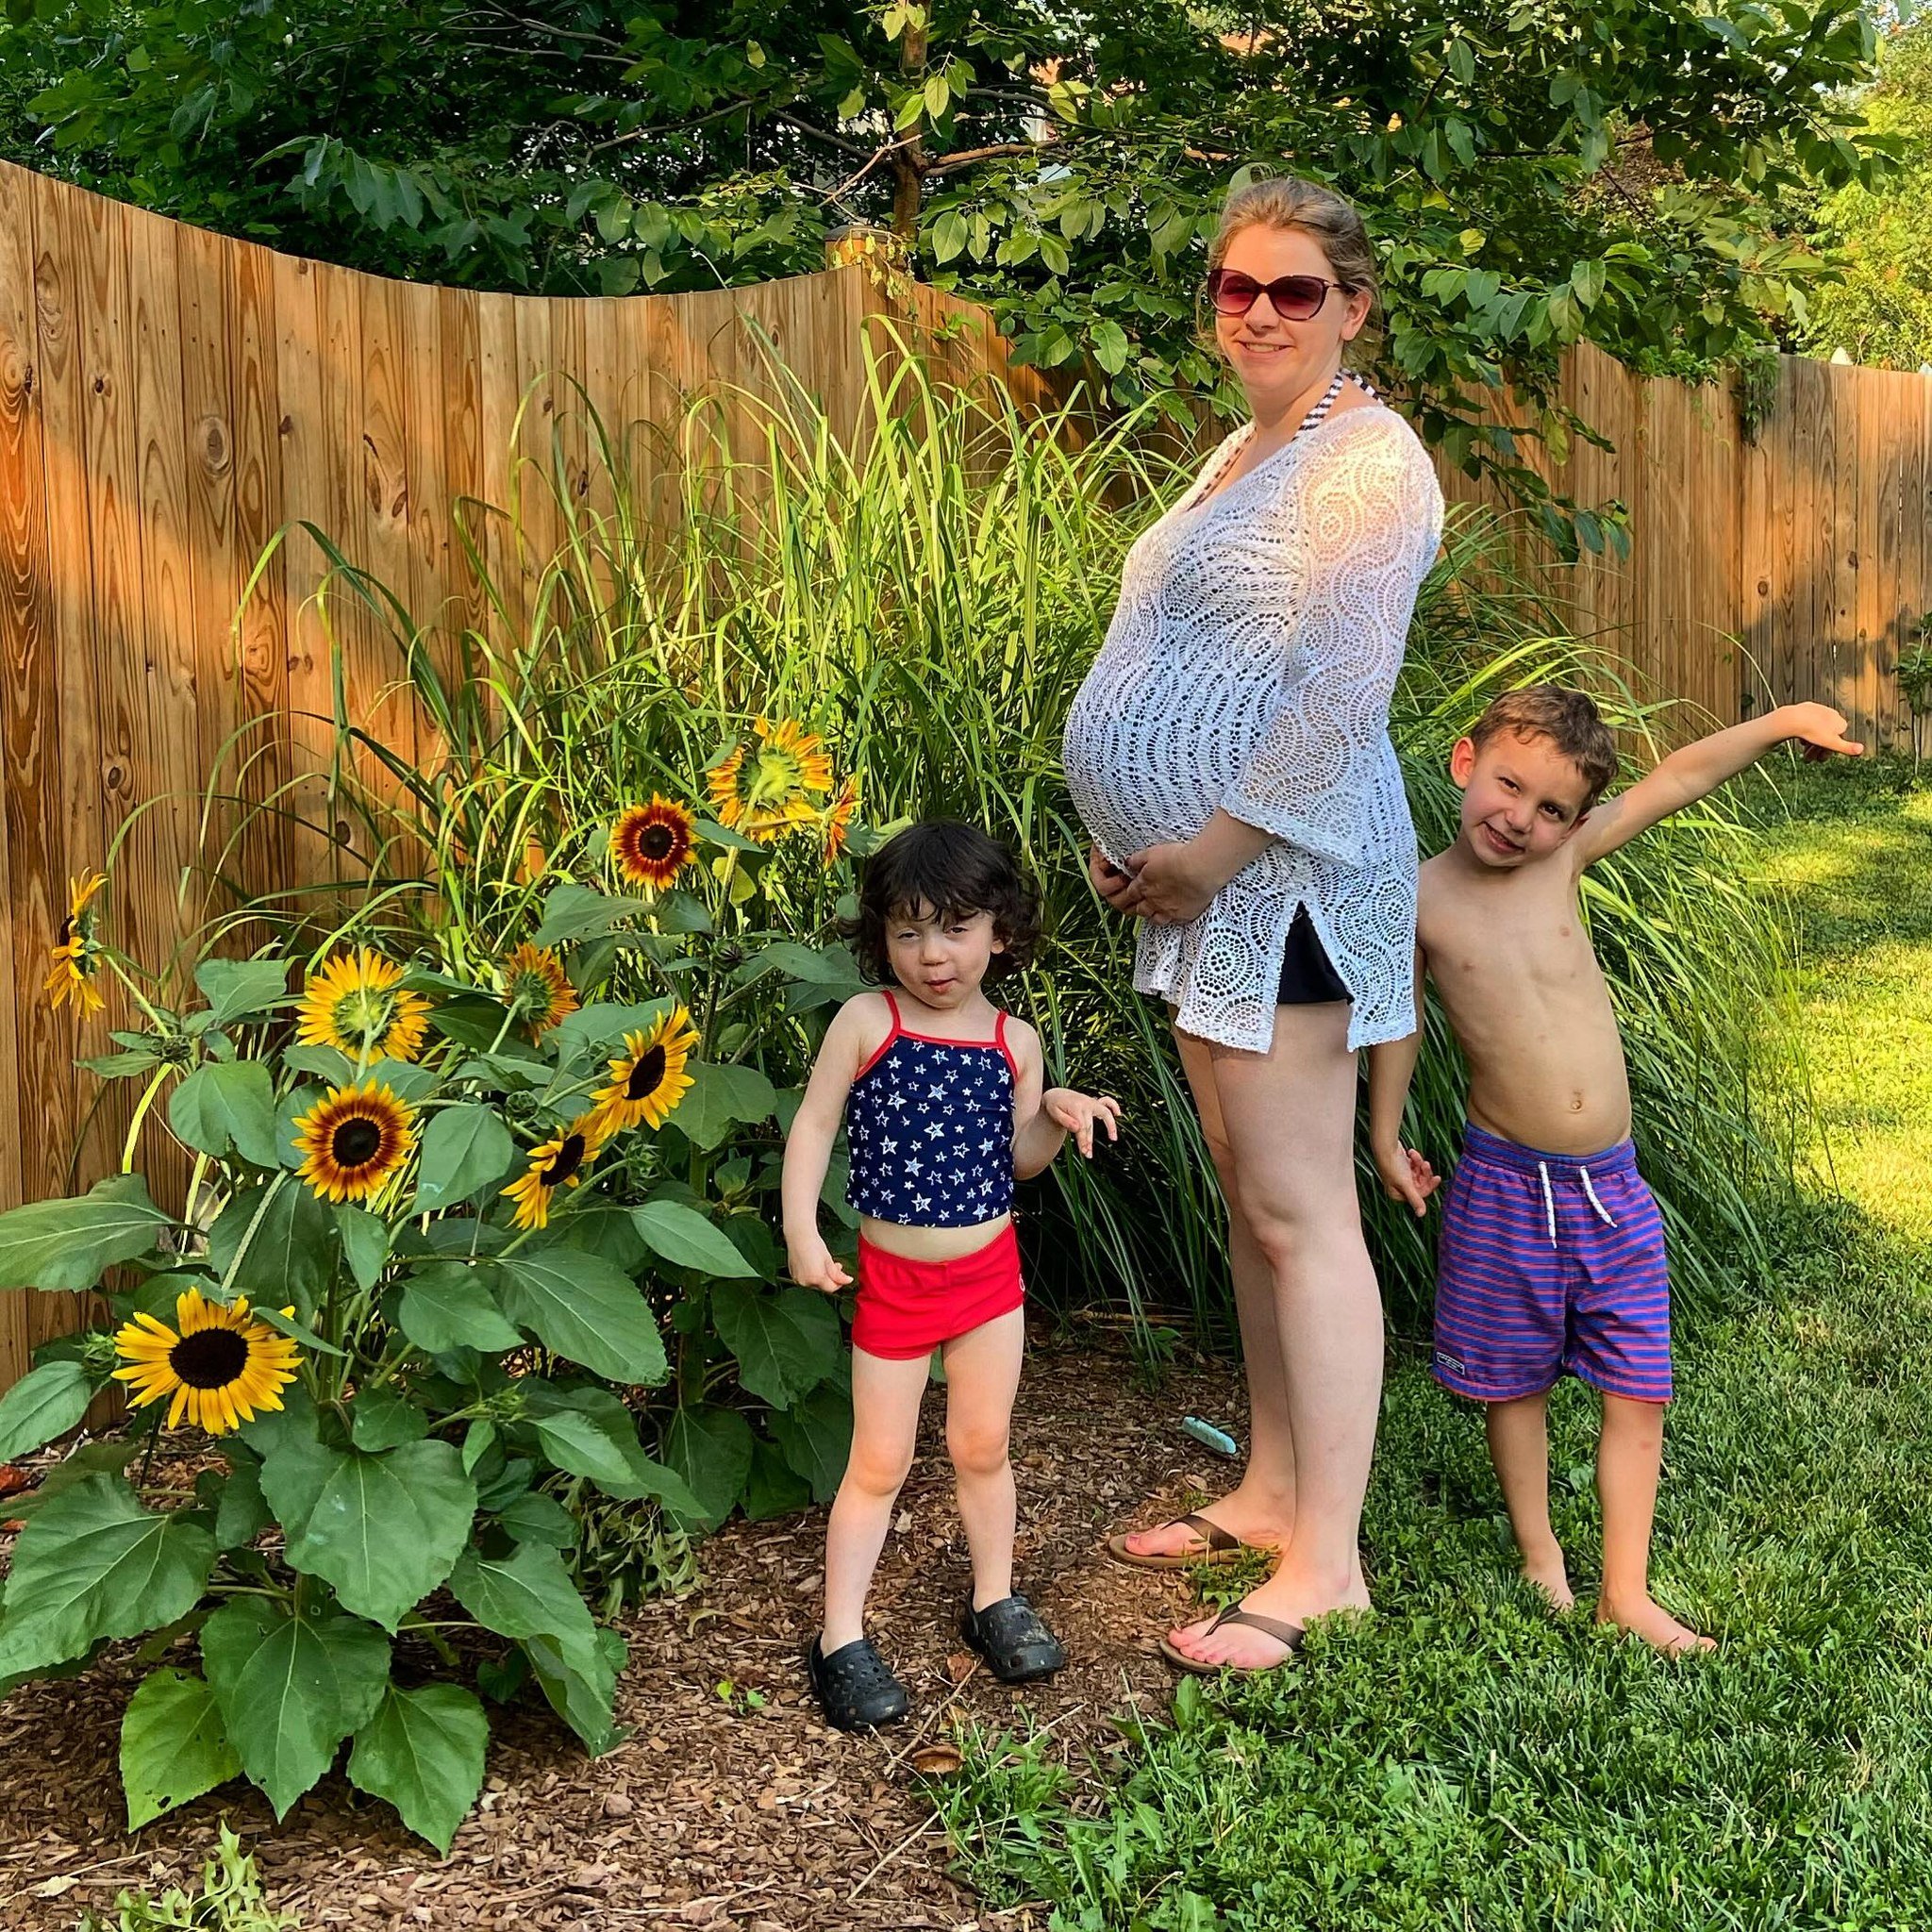 Throwback to being pregnant in the summer 🥵. Fun times!

If this is going to be you&hellip;now is a great time to register for our in-person weekend childbirth prep course (June 29-30th at @nurturenook.dc)! We will commiserate about the heat, but al